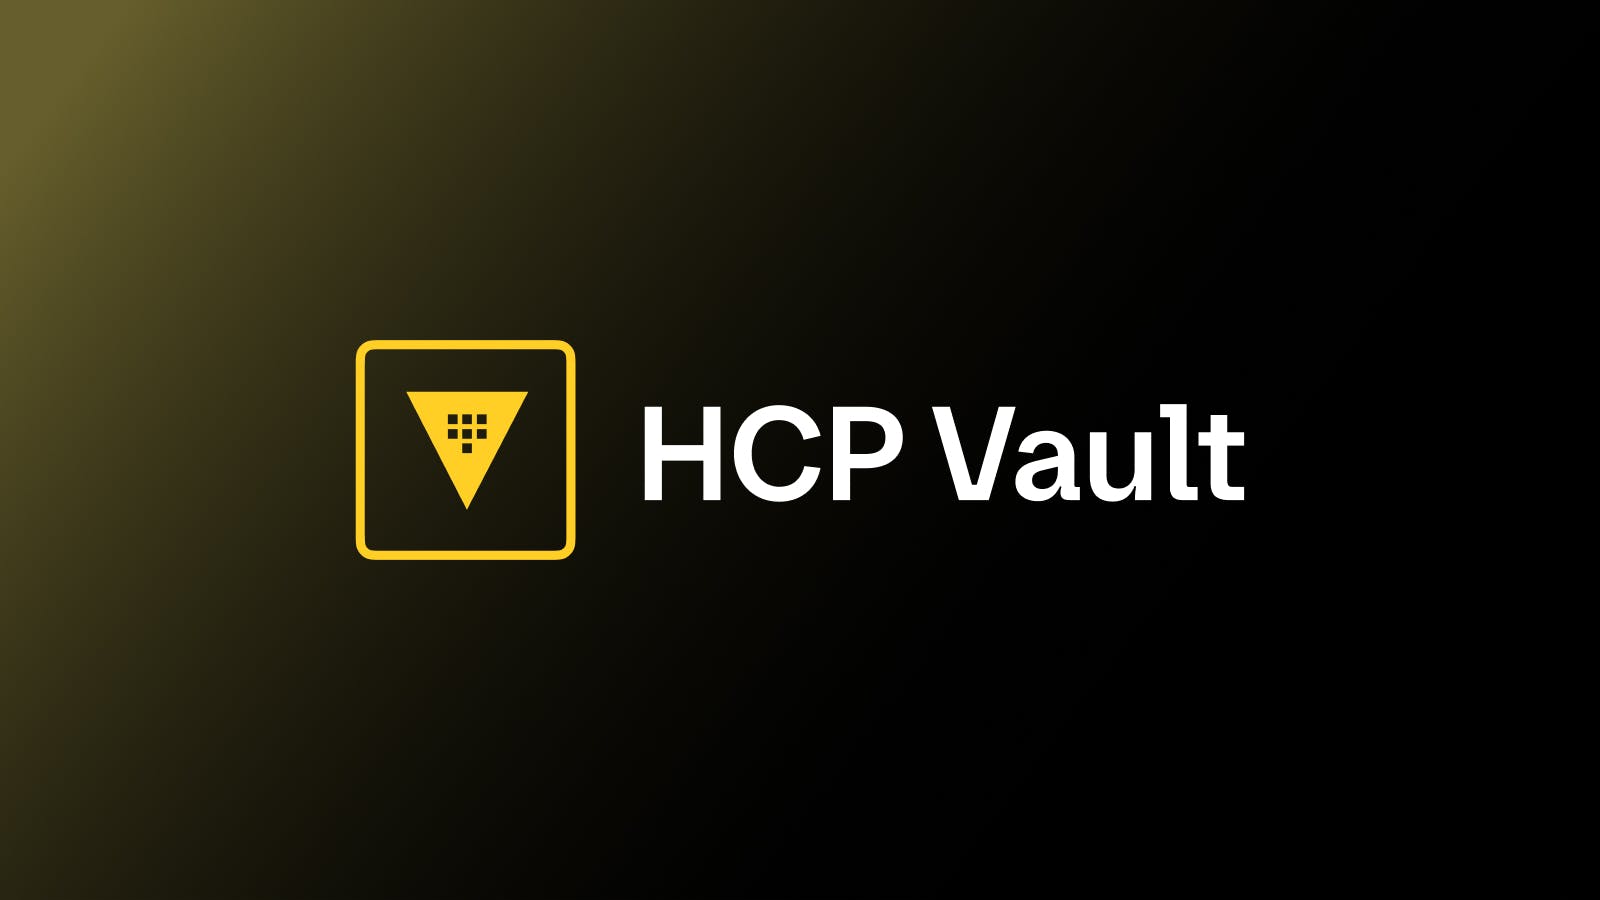 Multi-Region Replication Now Available with HCP Vault